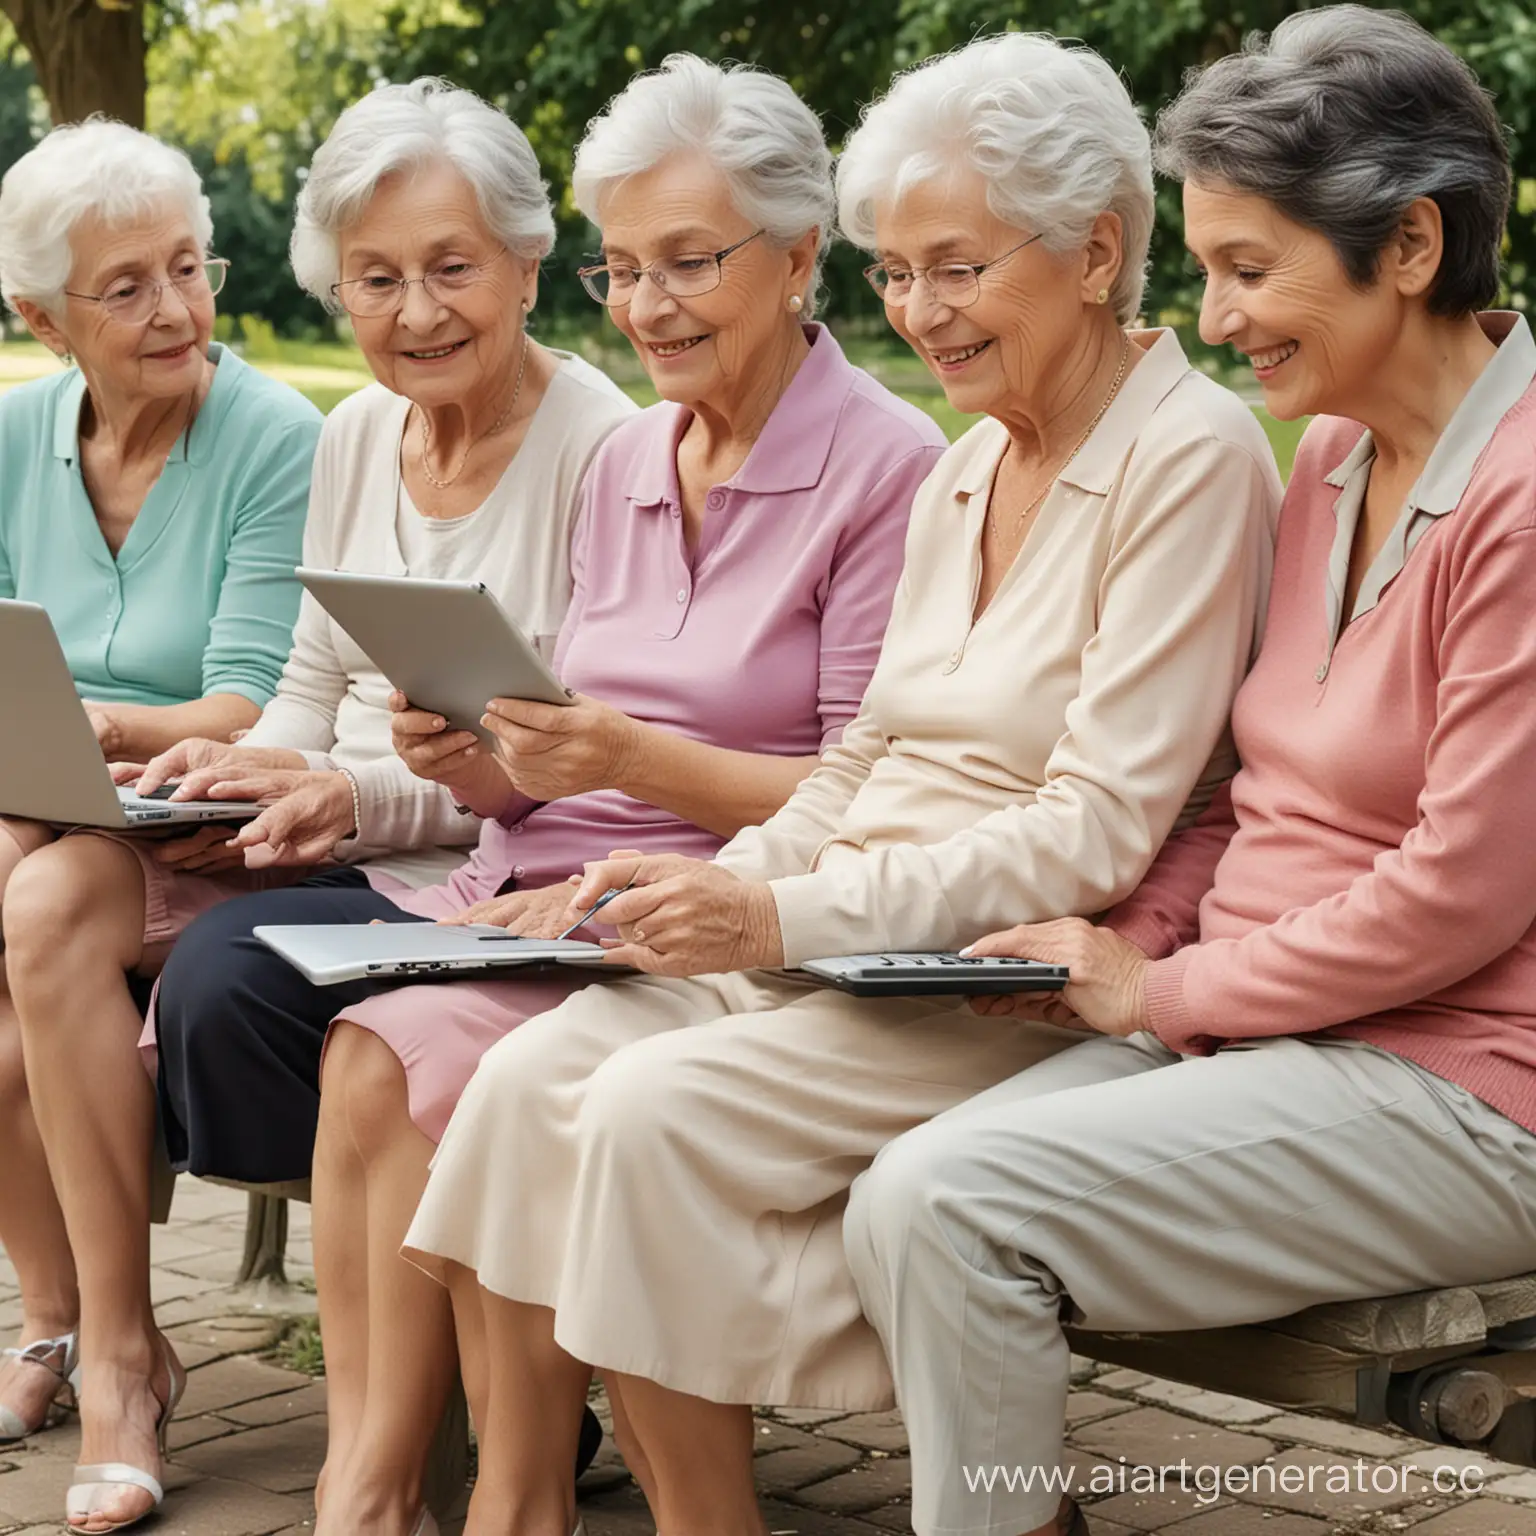 Four elderly ladies sit on a bench, and one of them has a computer with internet on her thighs, writing something, while the others looking at her monitor